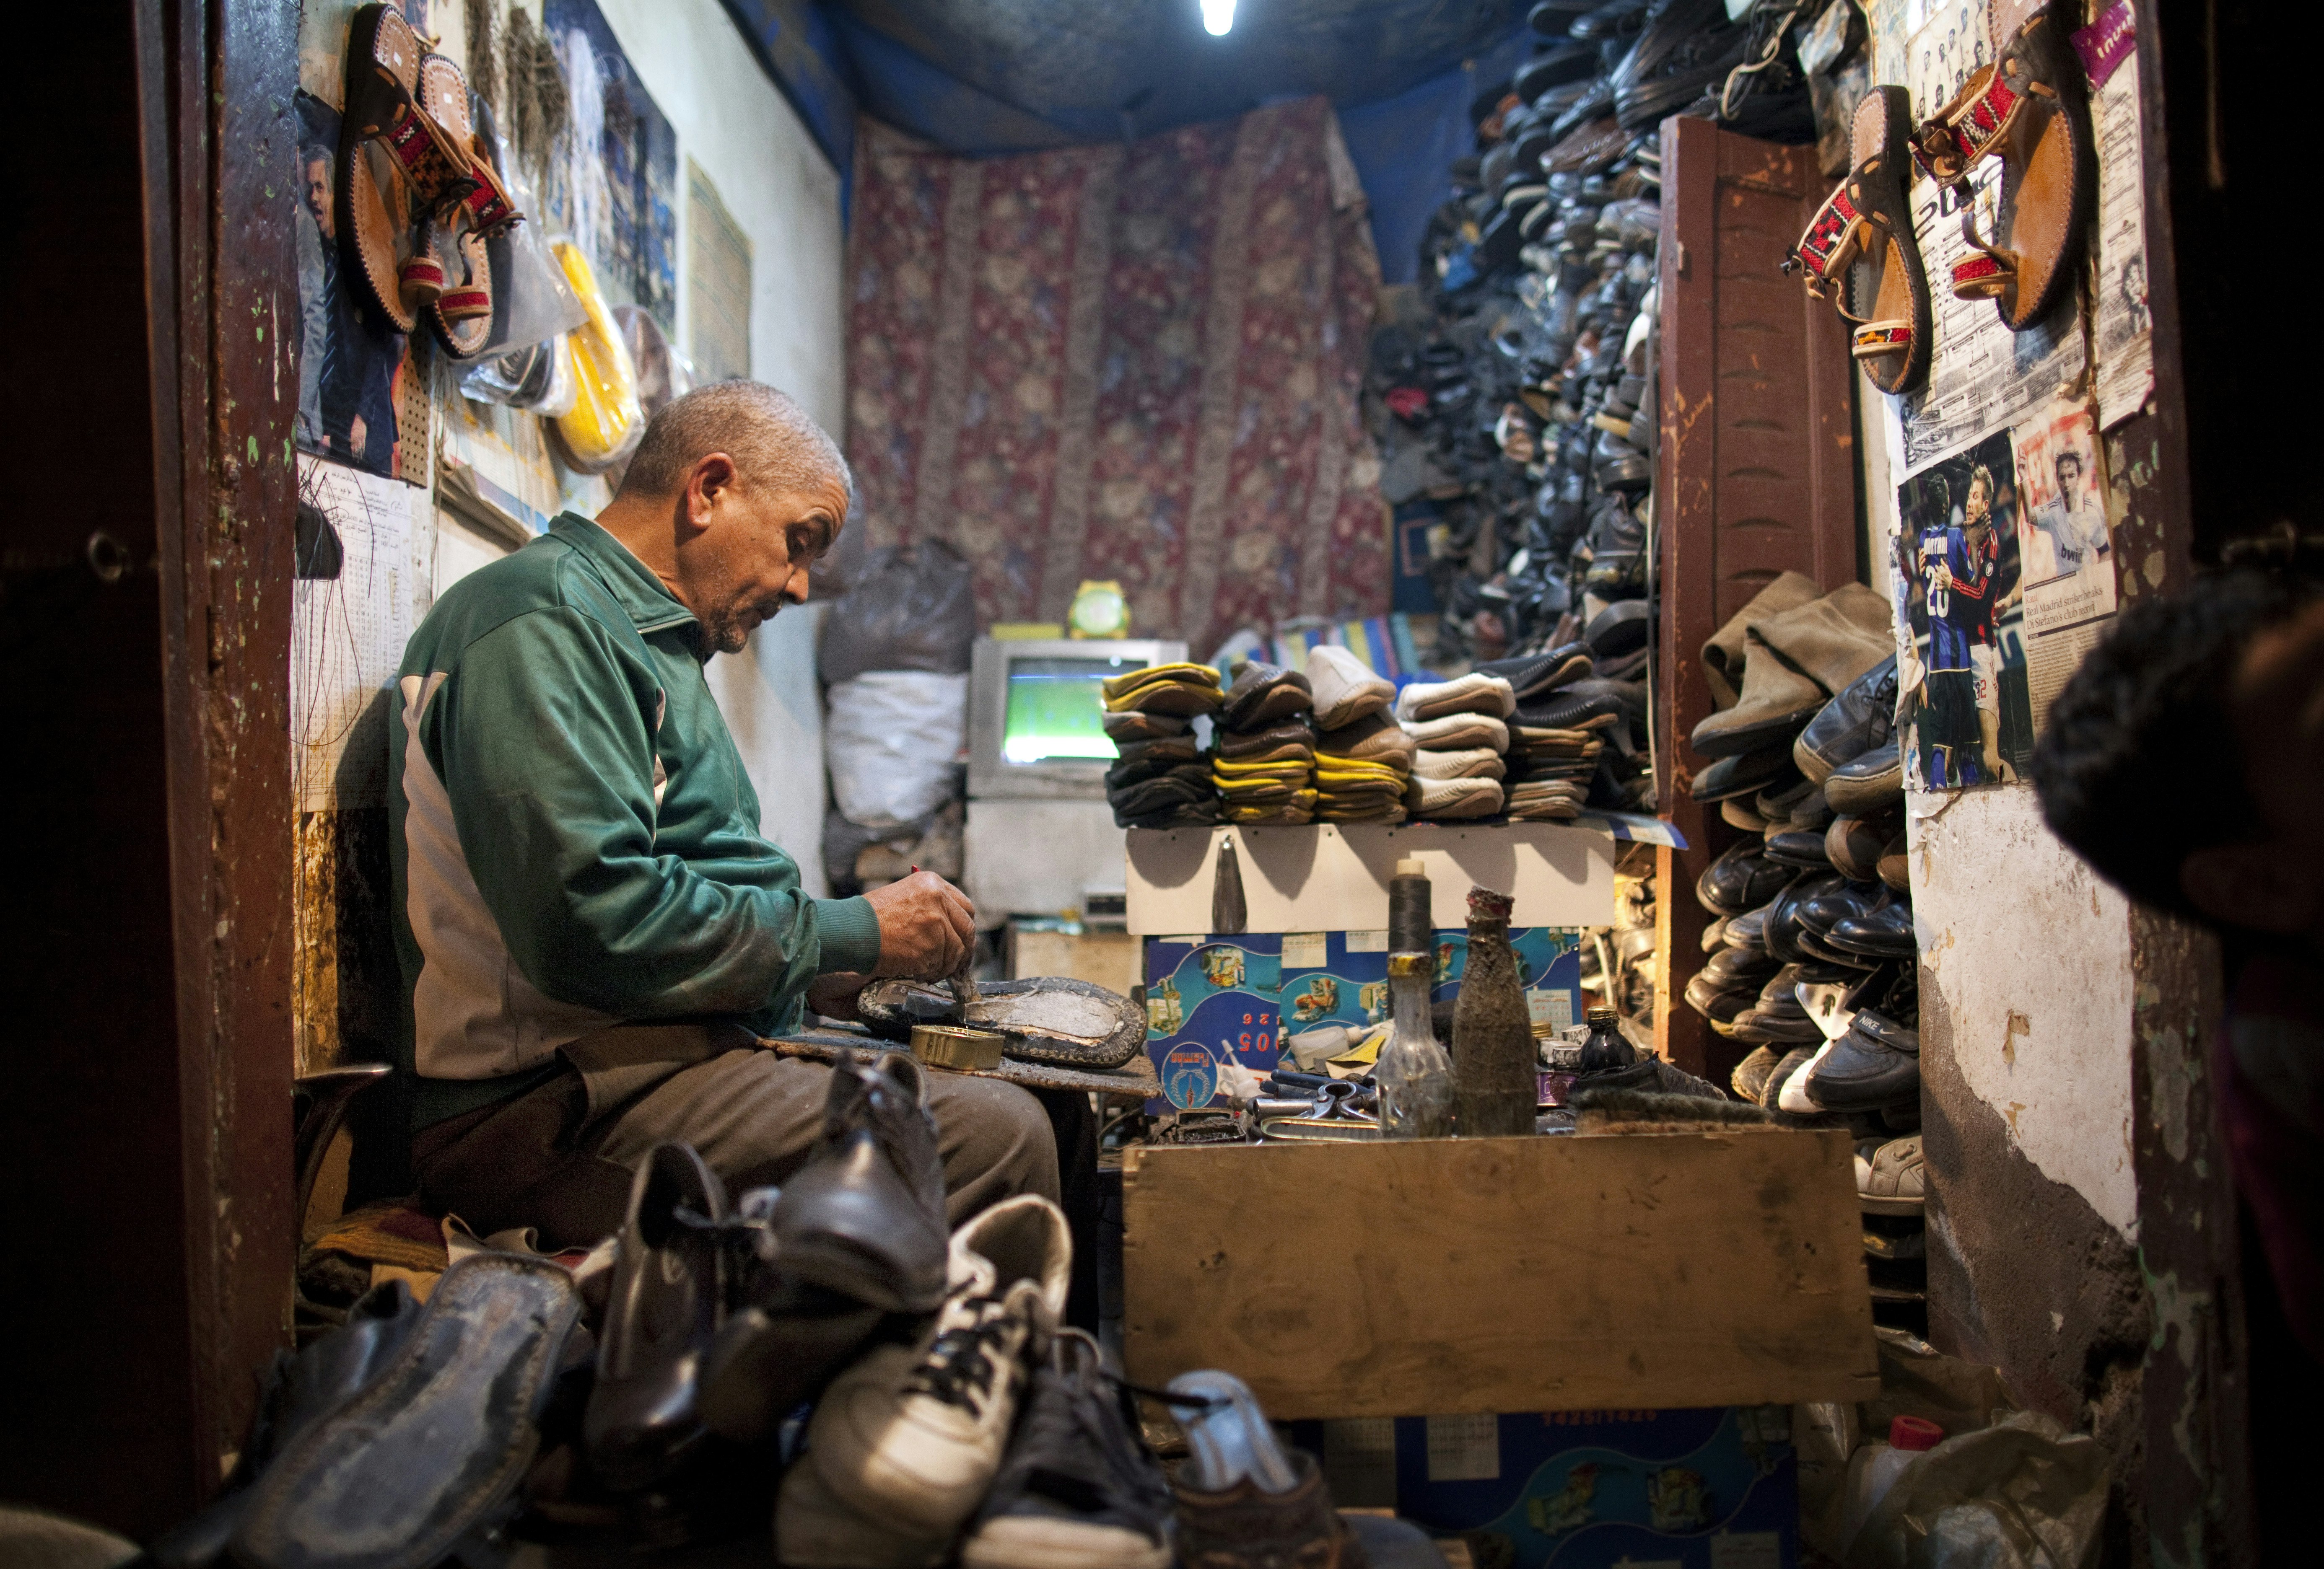 A man works leather shoes in the medina in Marrakesh, Morocco